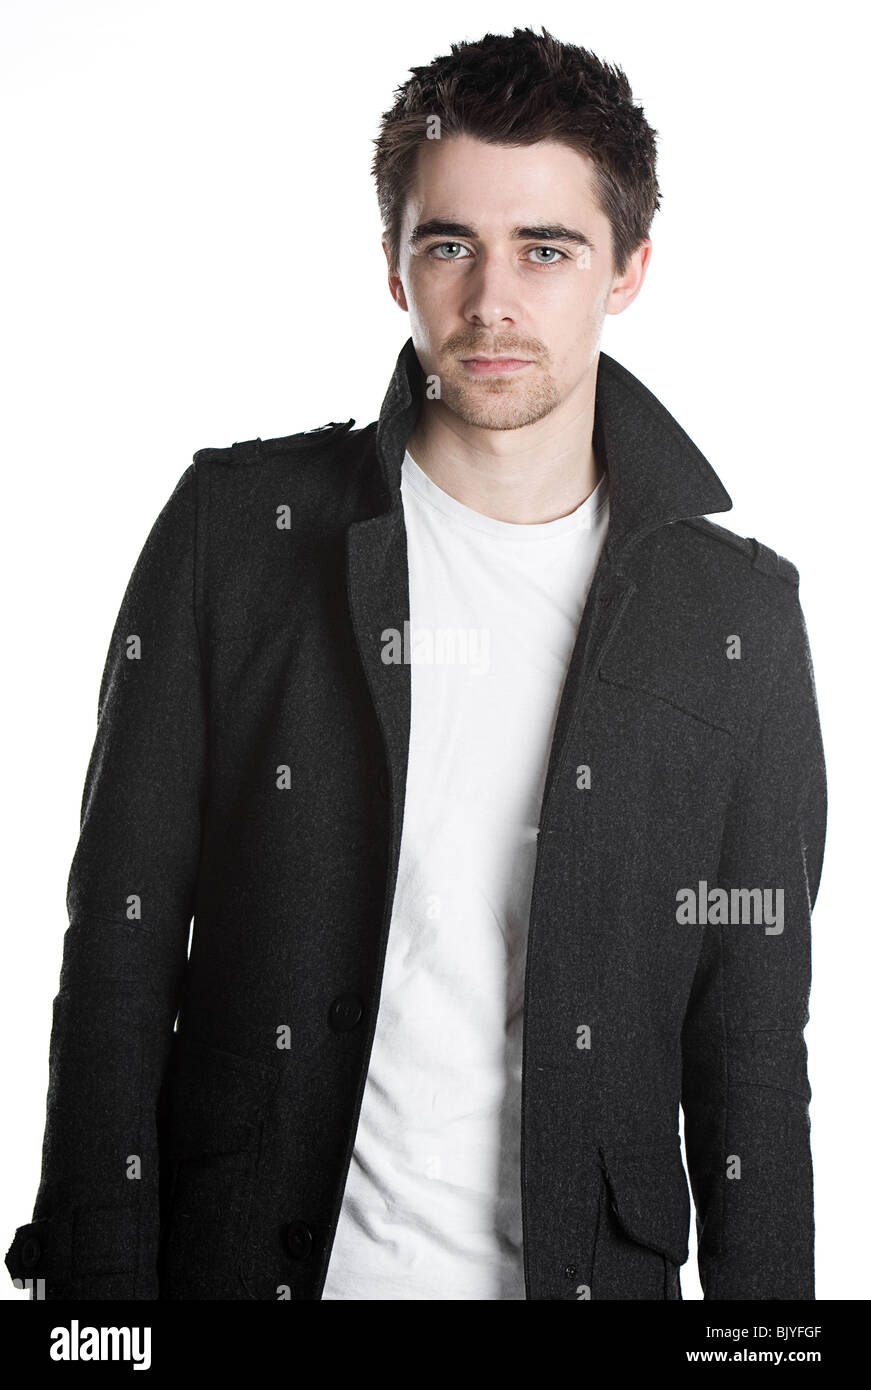 Isolated Shot of a Handsome Dark Haired Male in Jacket Stock Photo